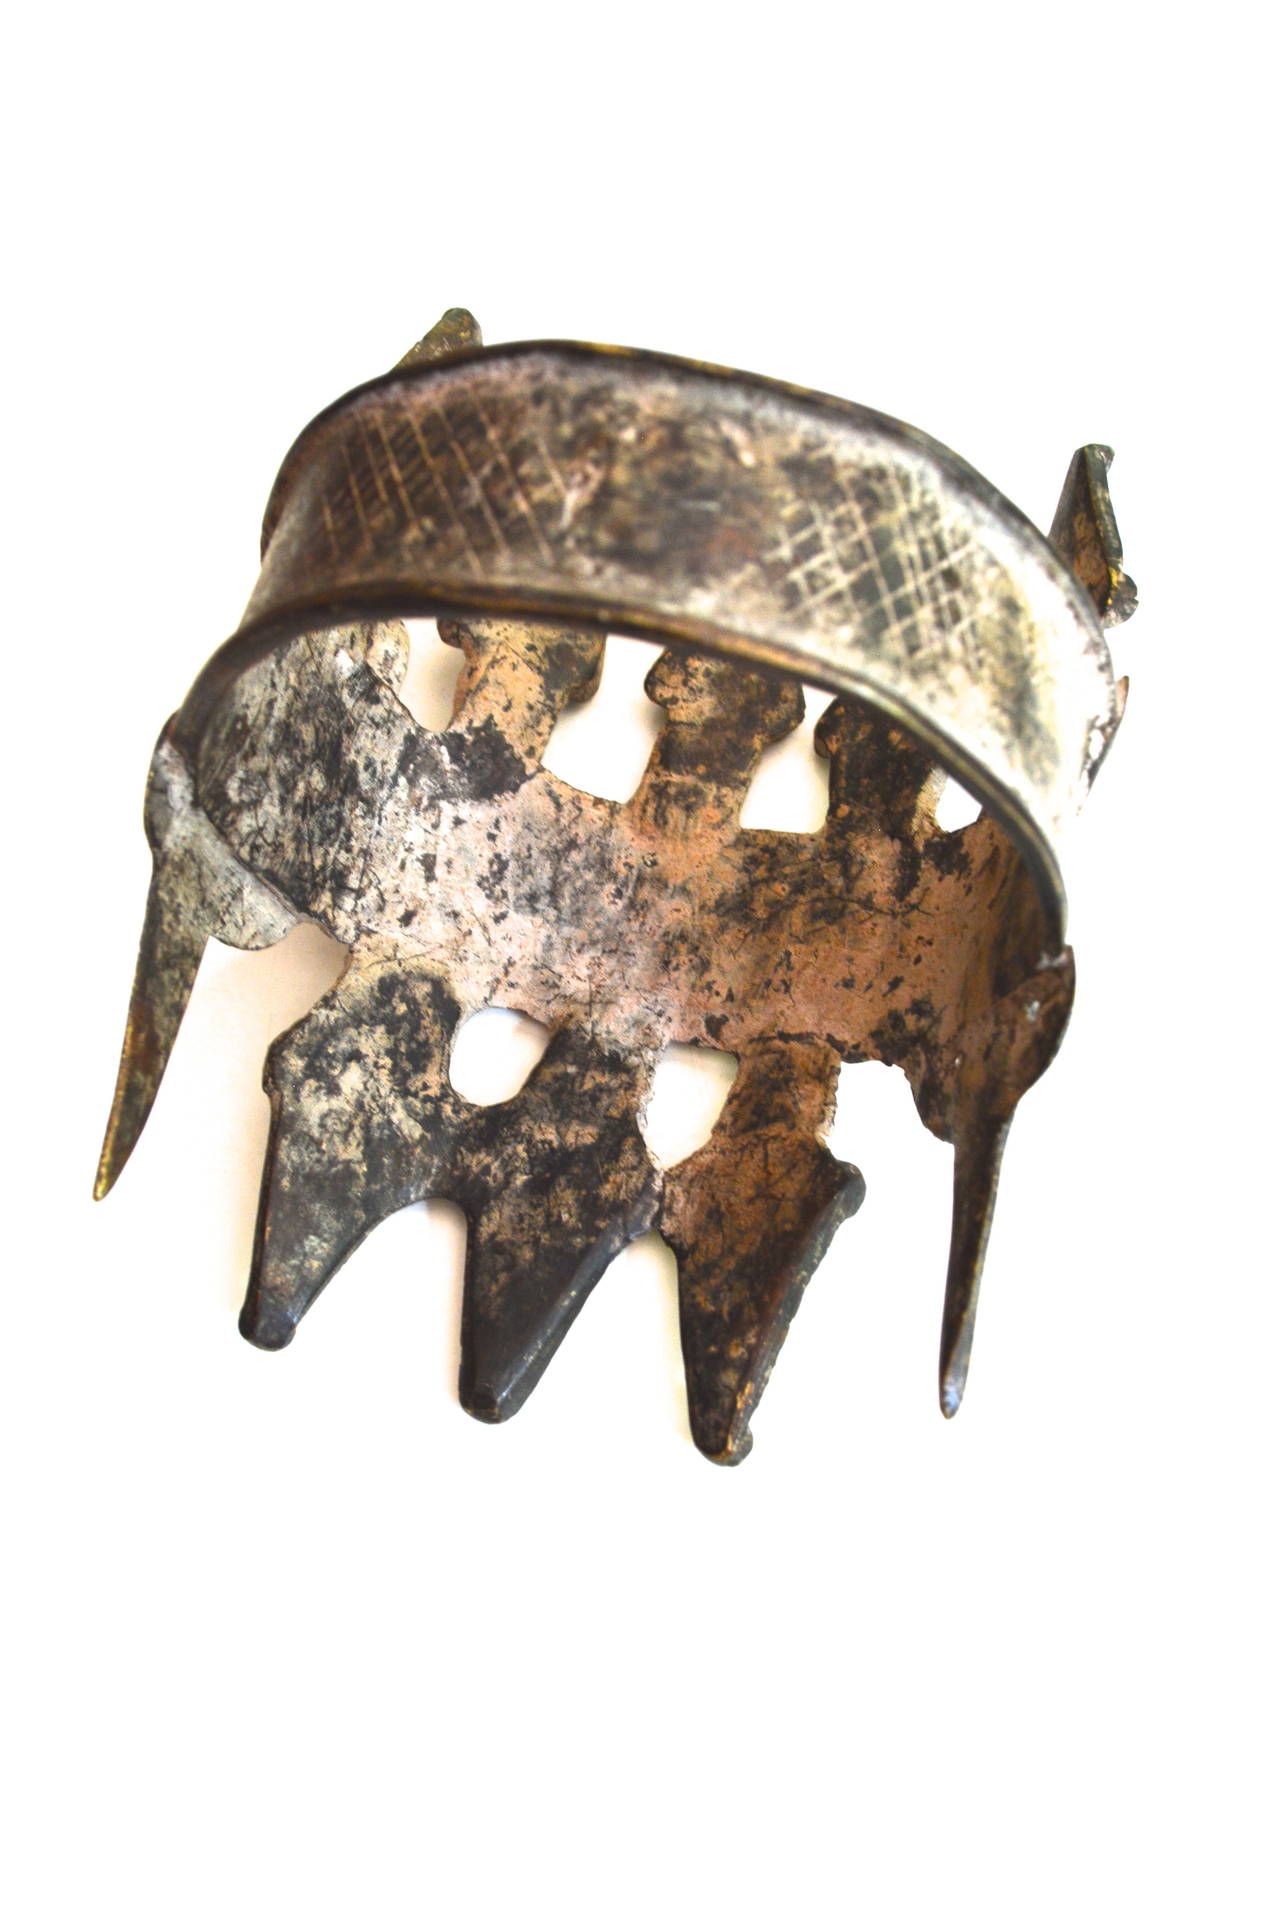 Lobi Burkina Faso Crocodile Amulet Armband  In Excellent Condition For Sale In Litchfield County, CT